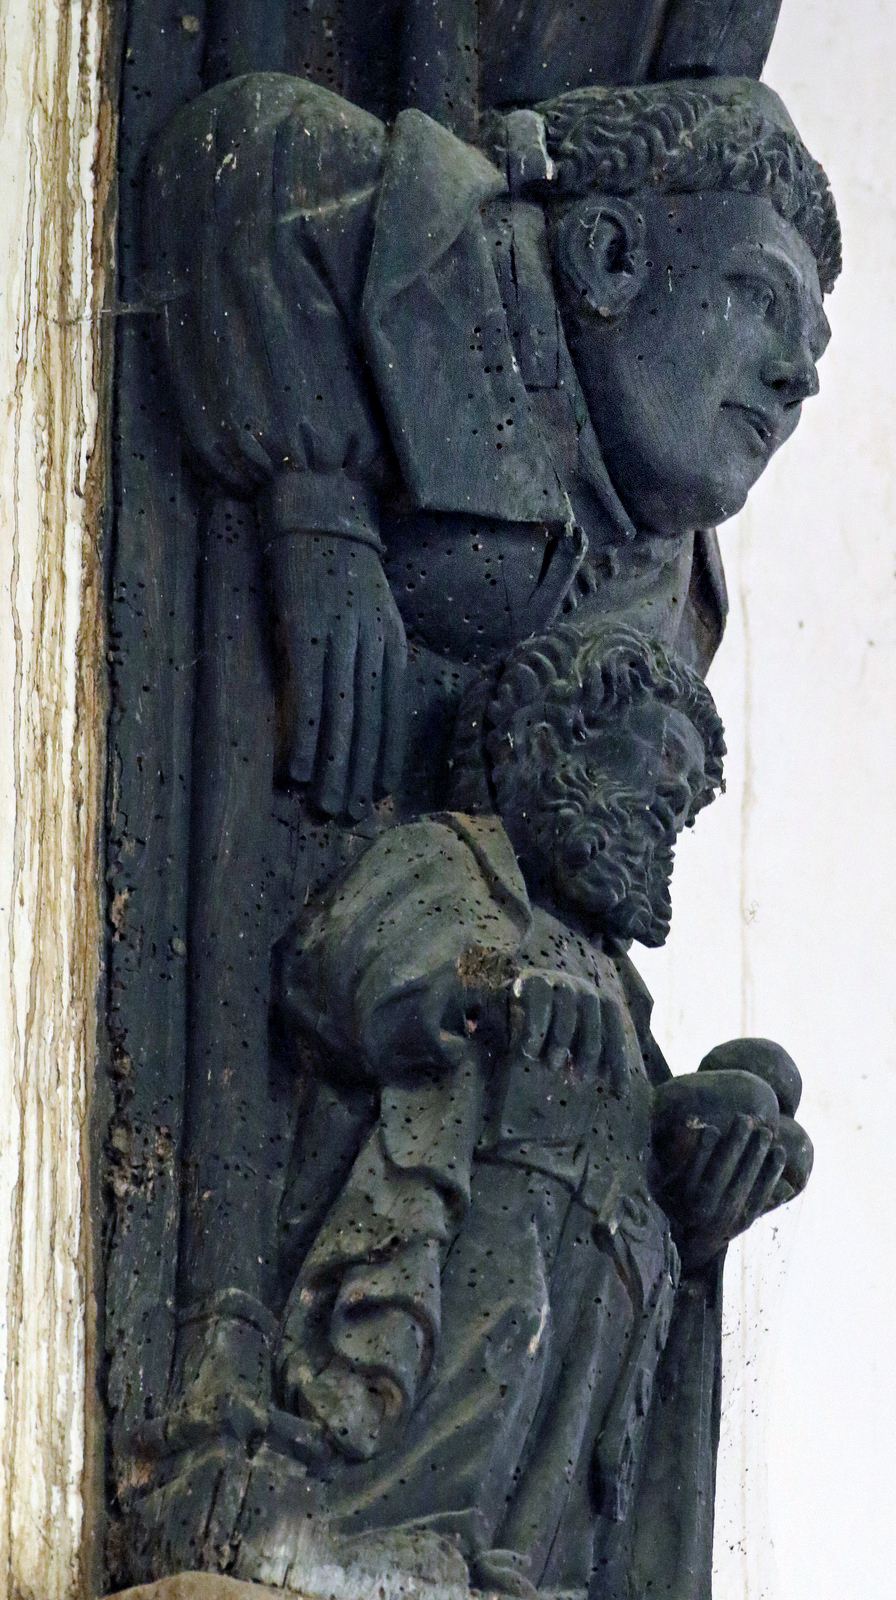 Details of some of the double figures on the roof posts with an apostle on each: a demon with St John